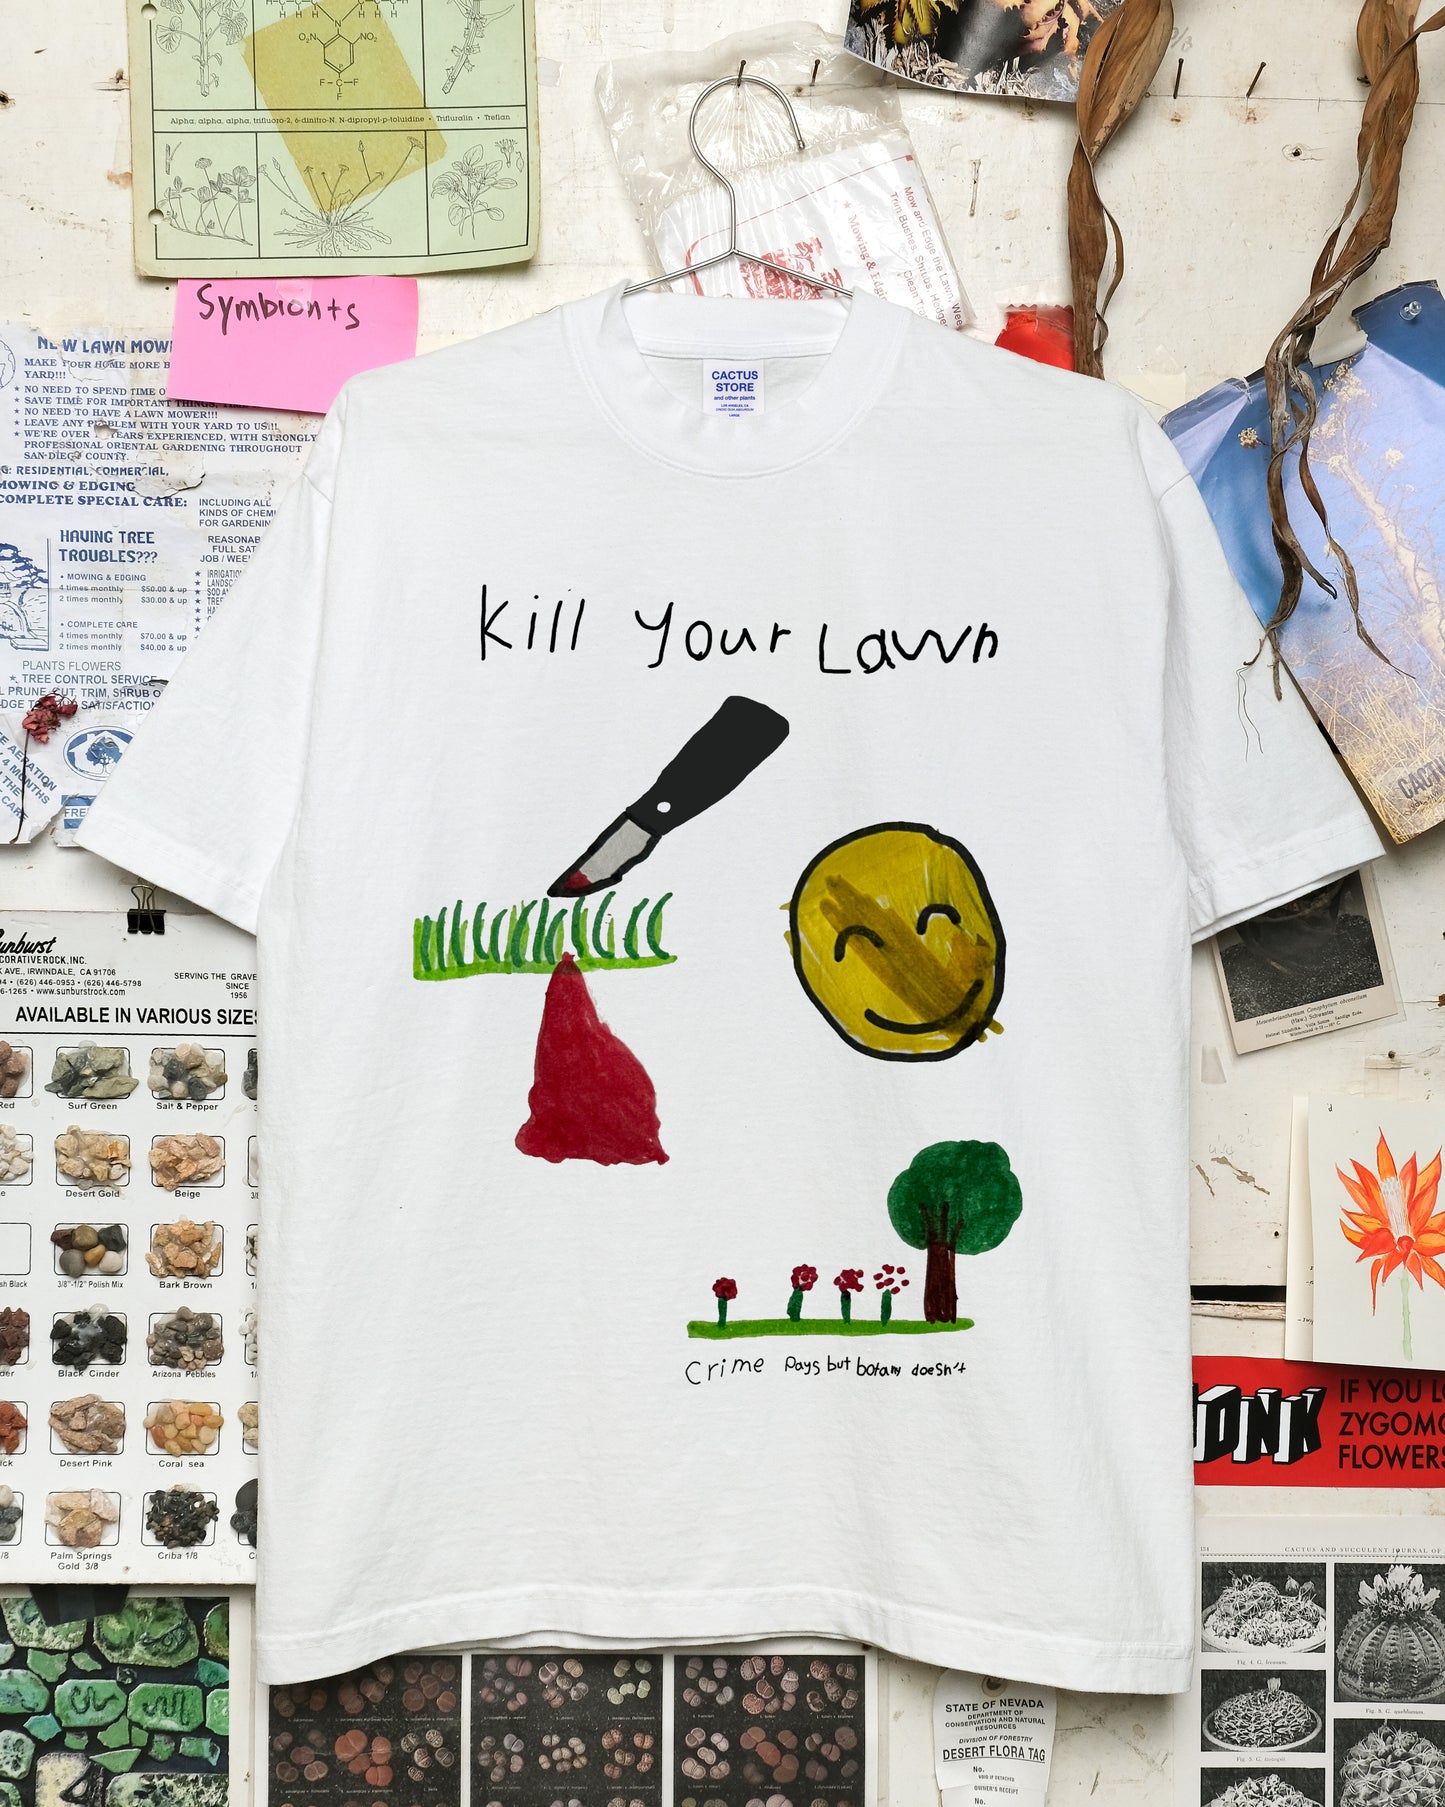 Kill Your Lawn (Crime Pays Botany Doesn't) Shirt